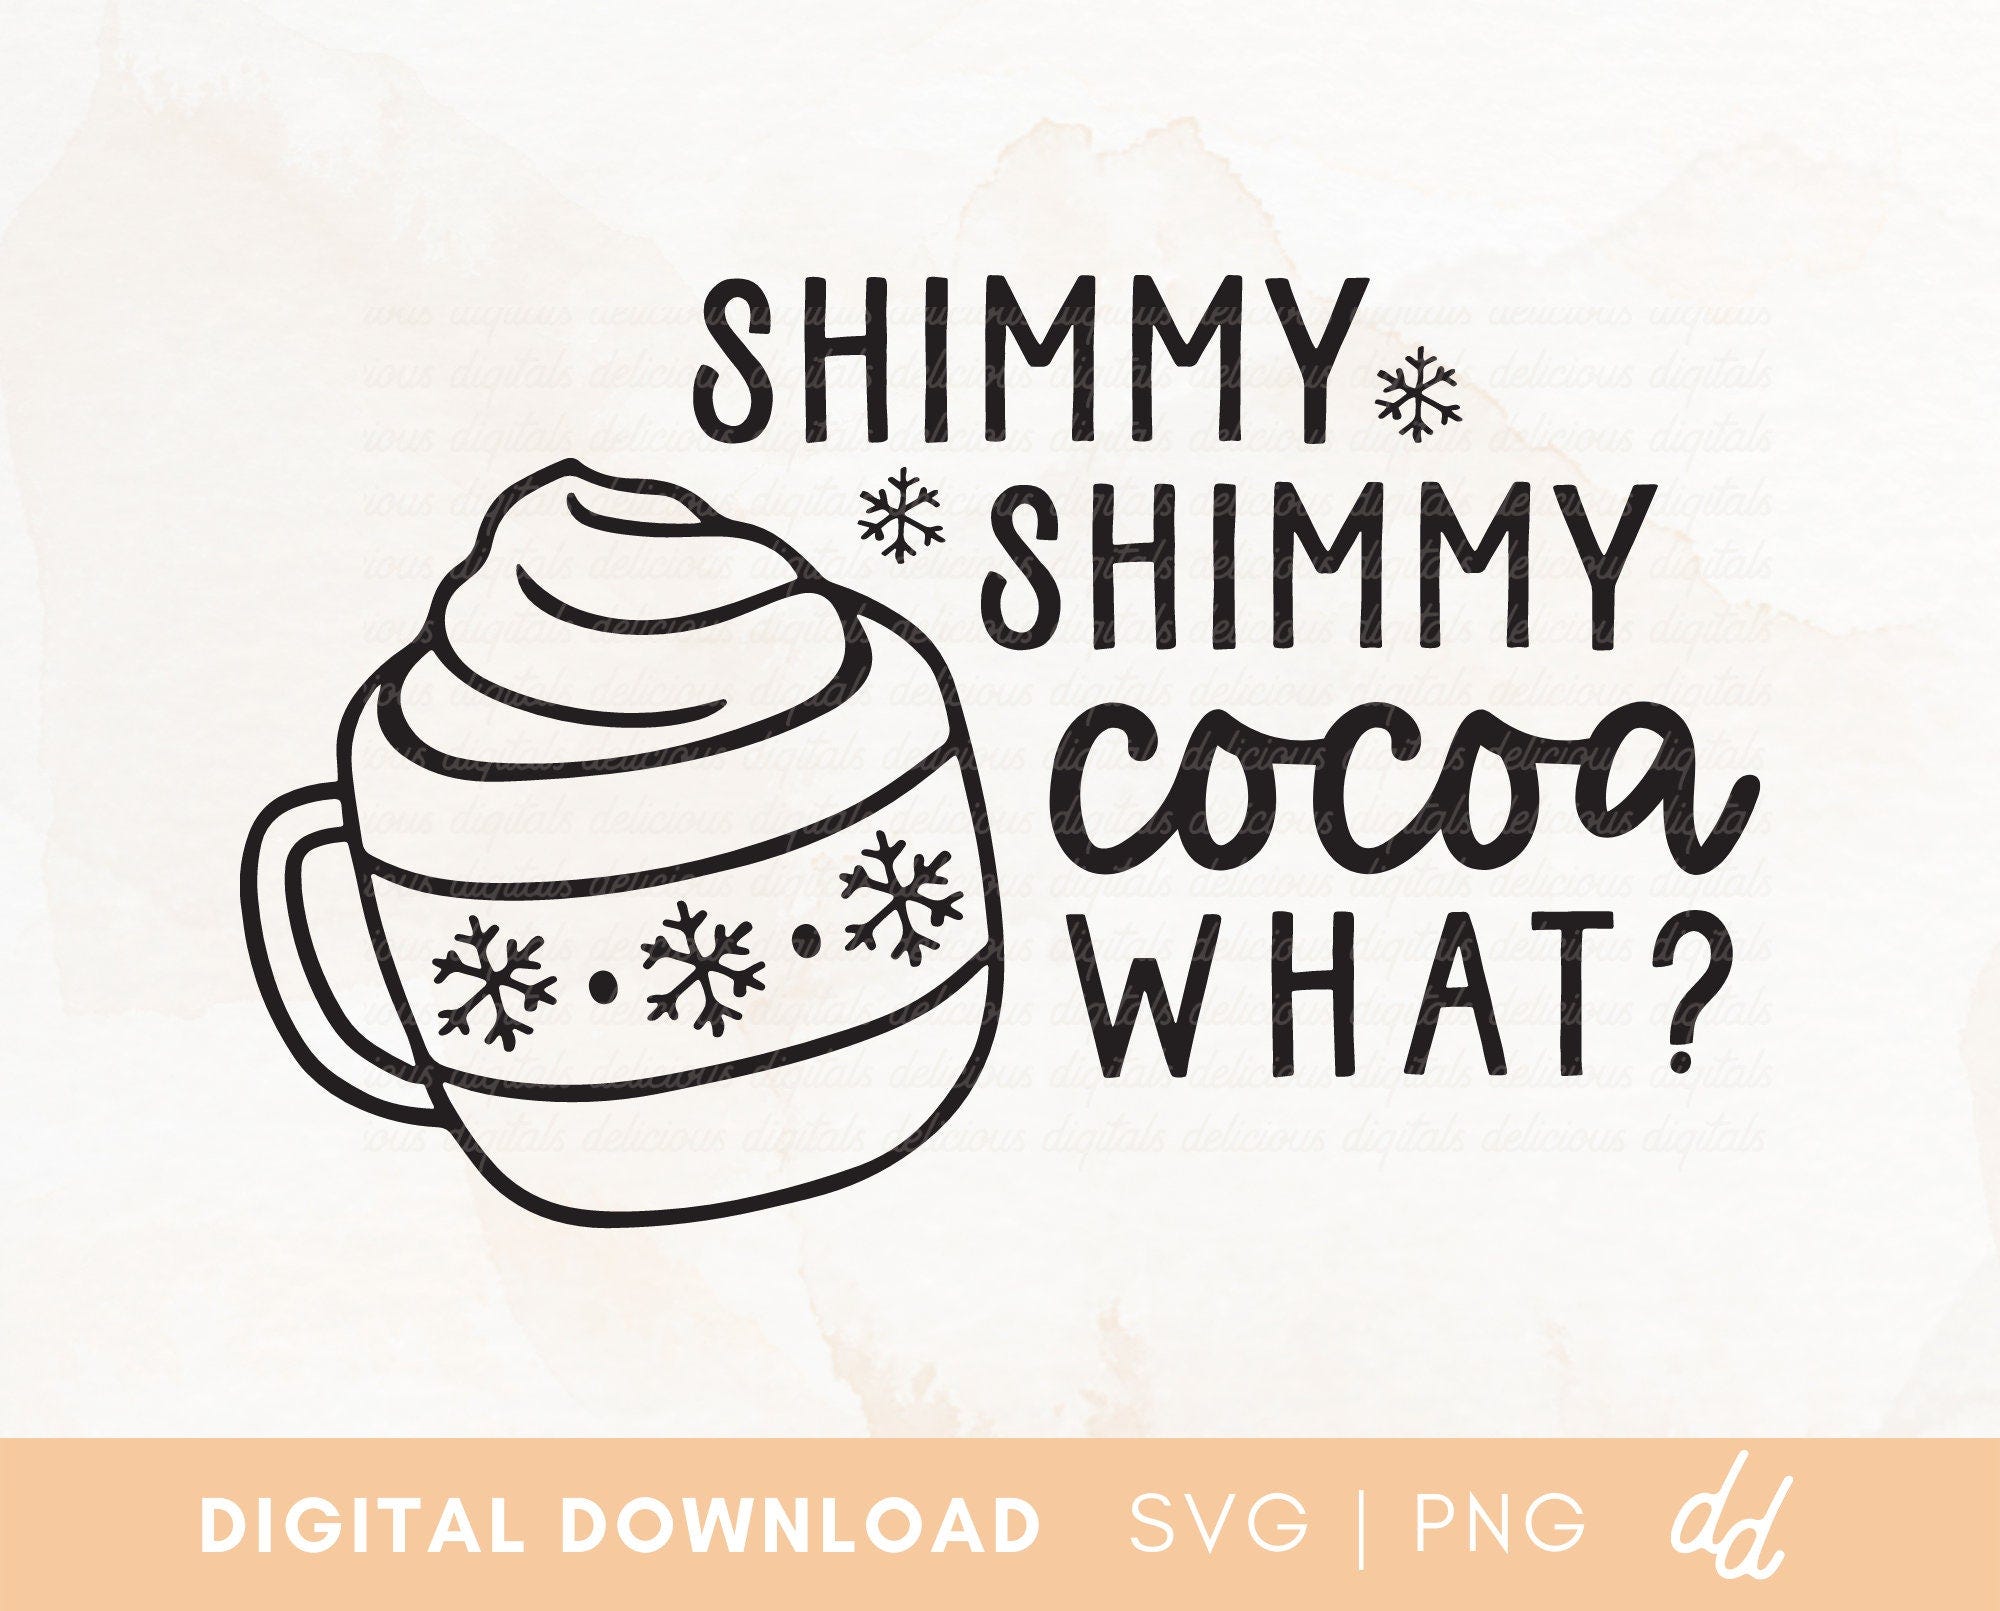 Shimmy Shimmy Cocoa What SVG, Hot cocoa Svg, Christmas Shirt Svg, Funny christmas Shirt, Christmas Shirt - Commercial Use, Digital File